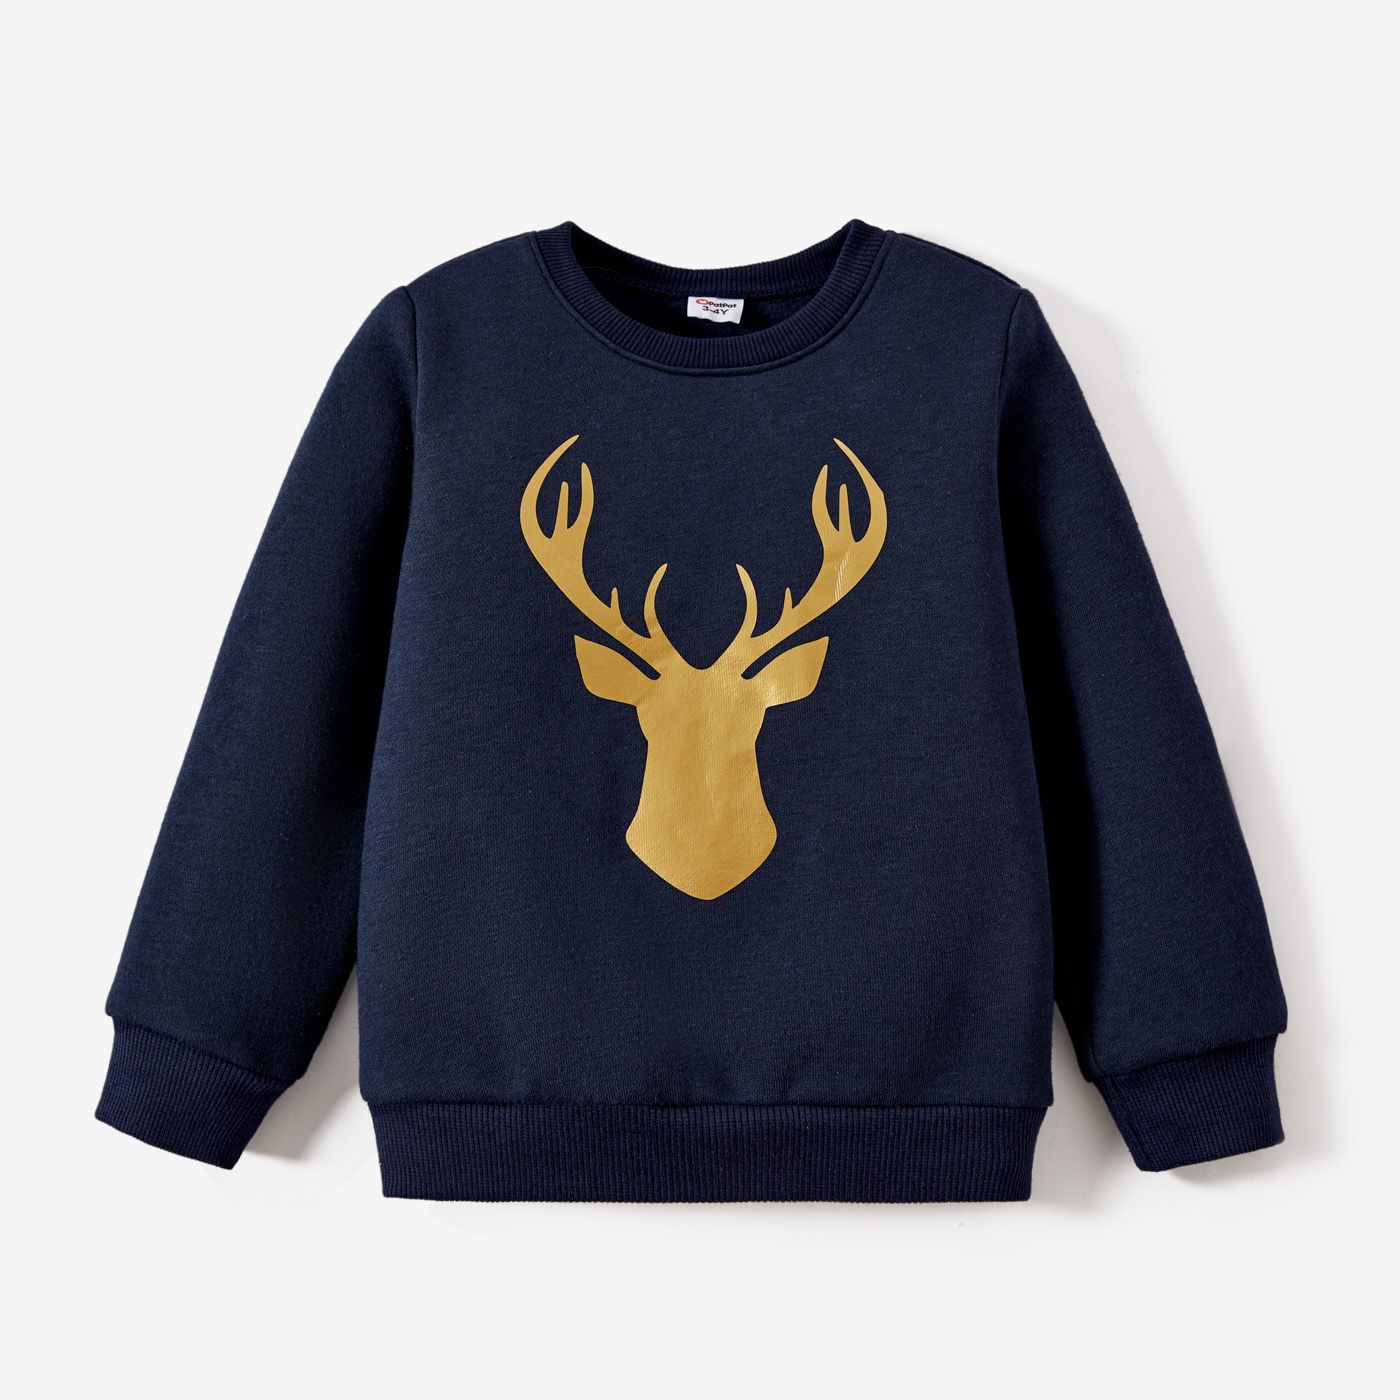 Christmas Family Matching Solid Color Reindeer Print Cotton Long Sleeve Tops